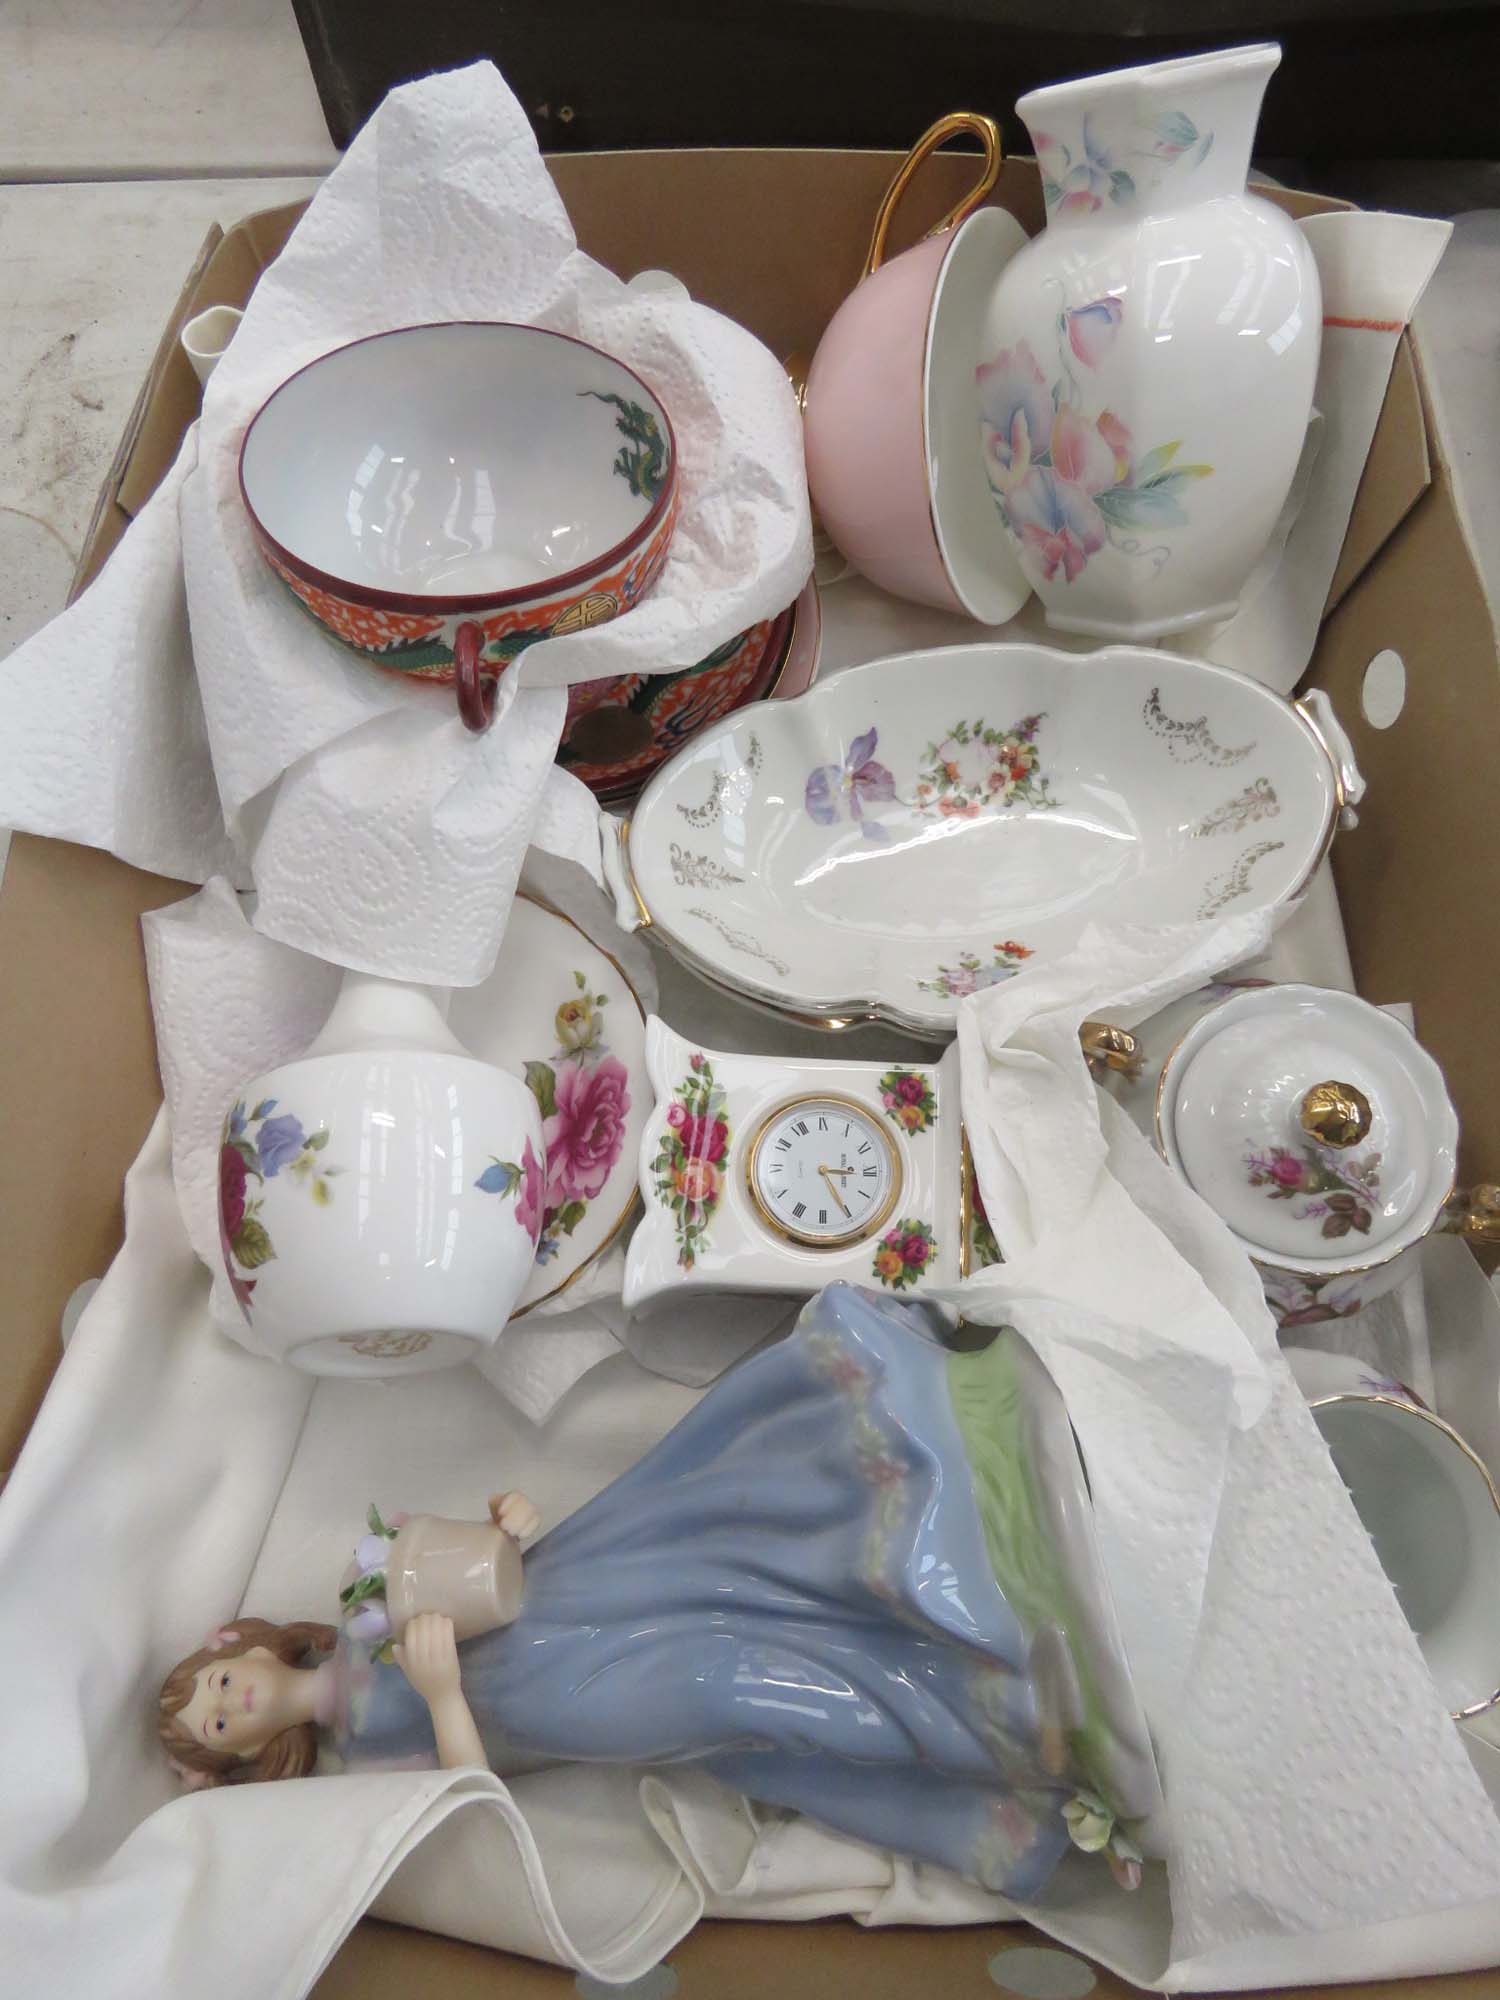 Box containing Aynsley, Royal Grafton, Regal and other crockery plus export Chinese ceramics